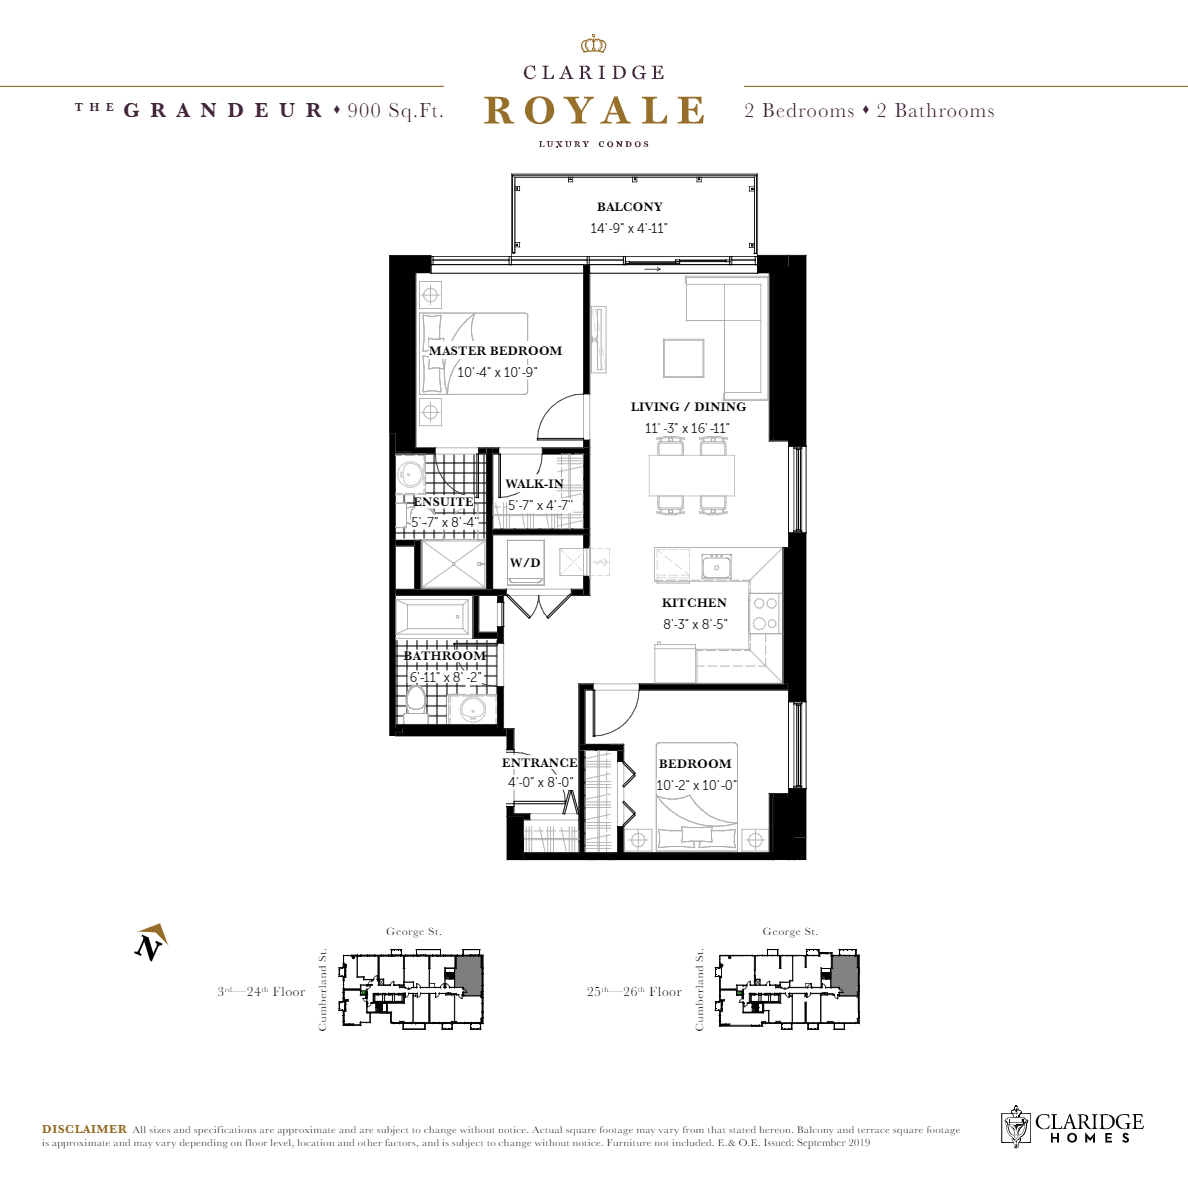  Floor Plan of Claridge Royale Condos with undefined beds